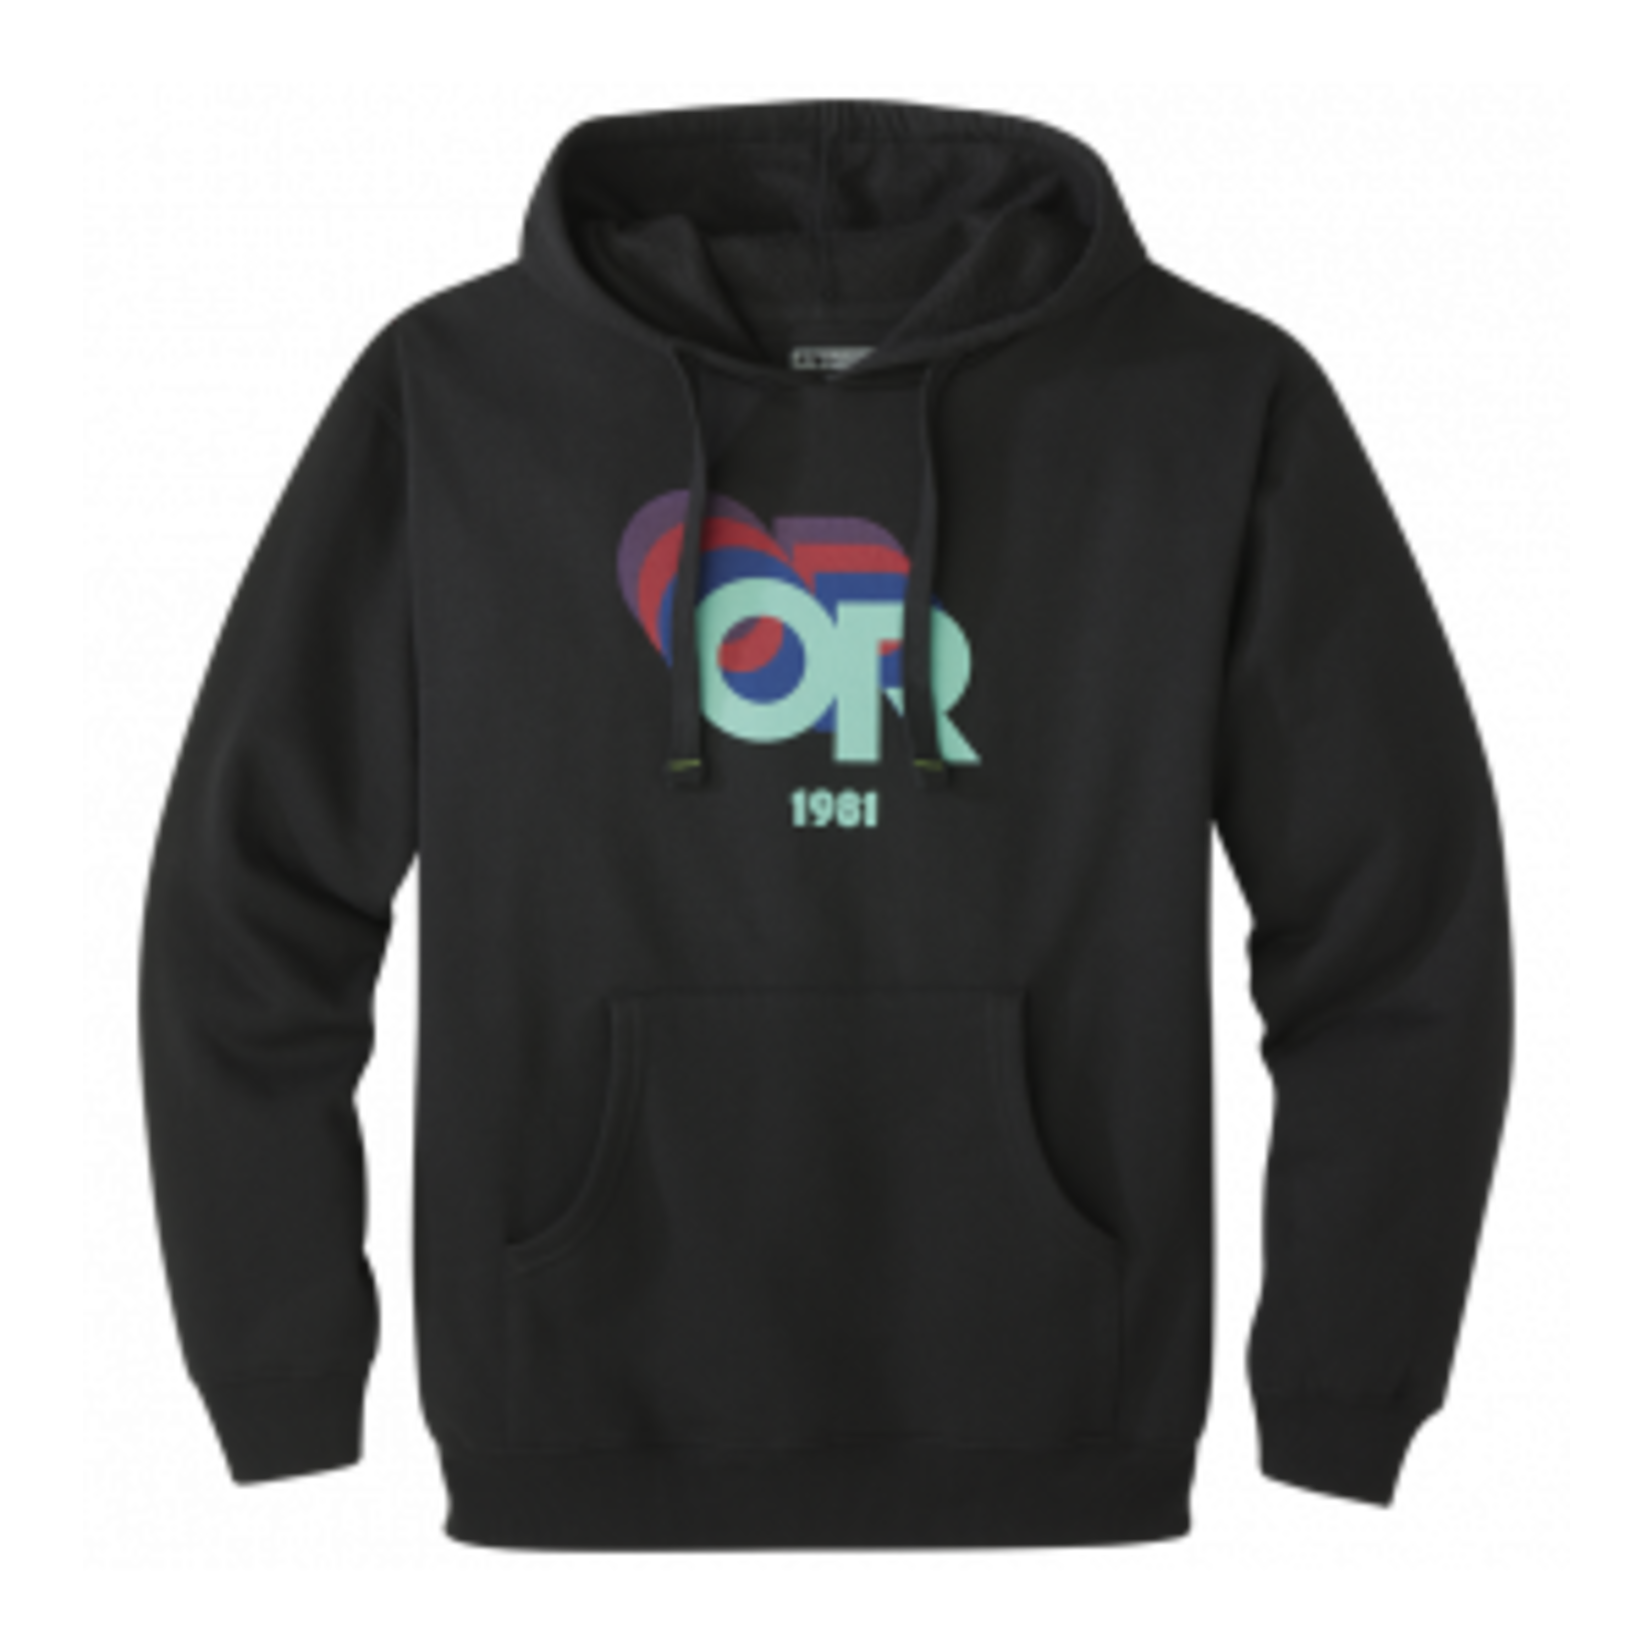 Outdoor Research Anniversary Hoodie